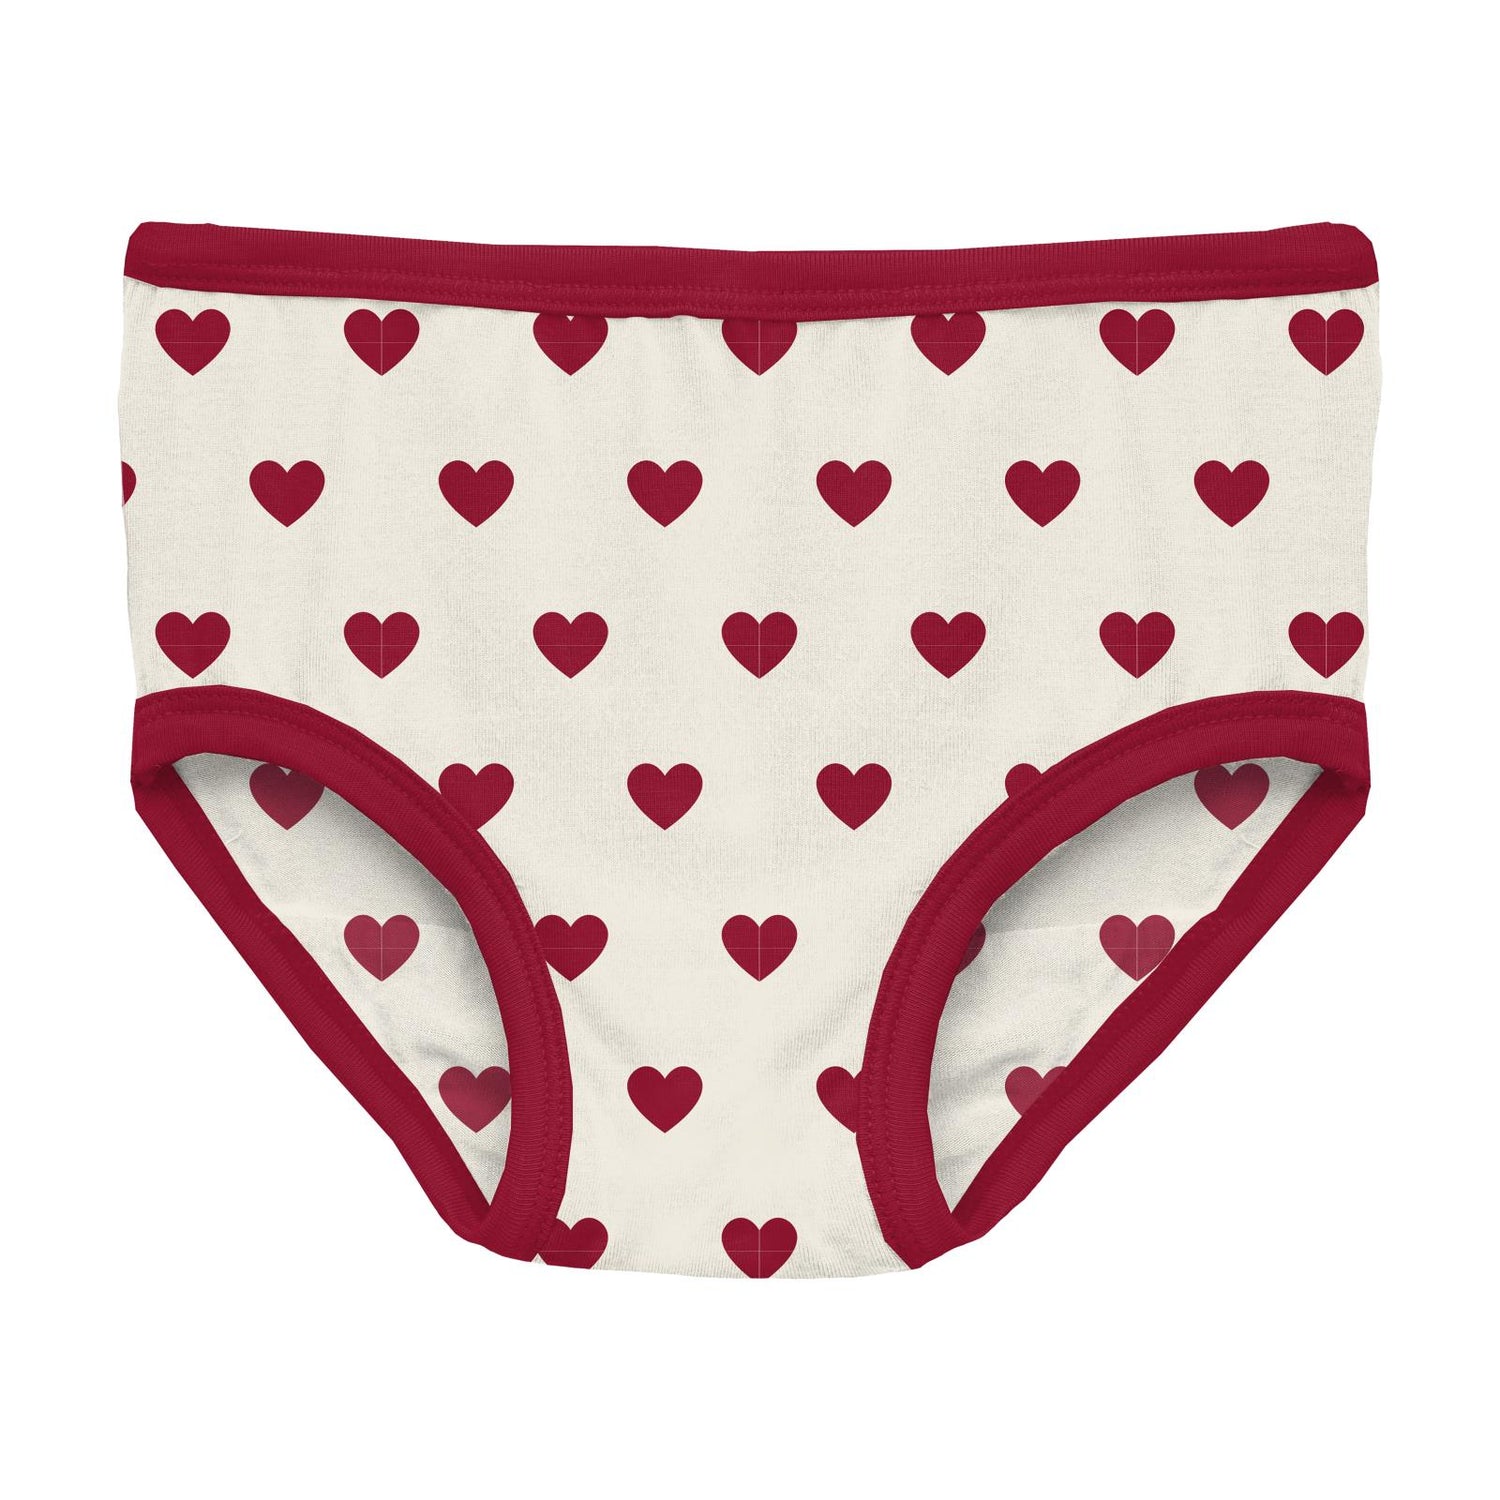 Print Girl's Underwear in Natural Hearts